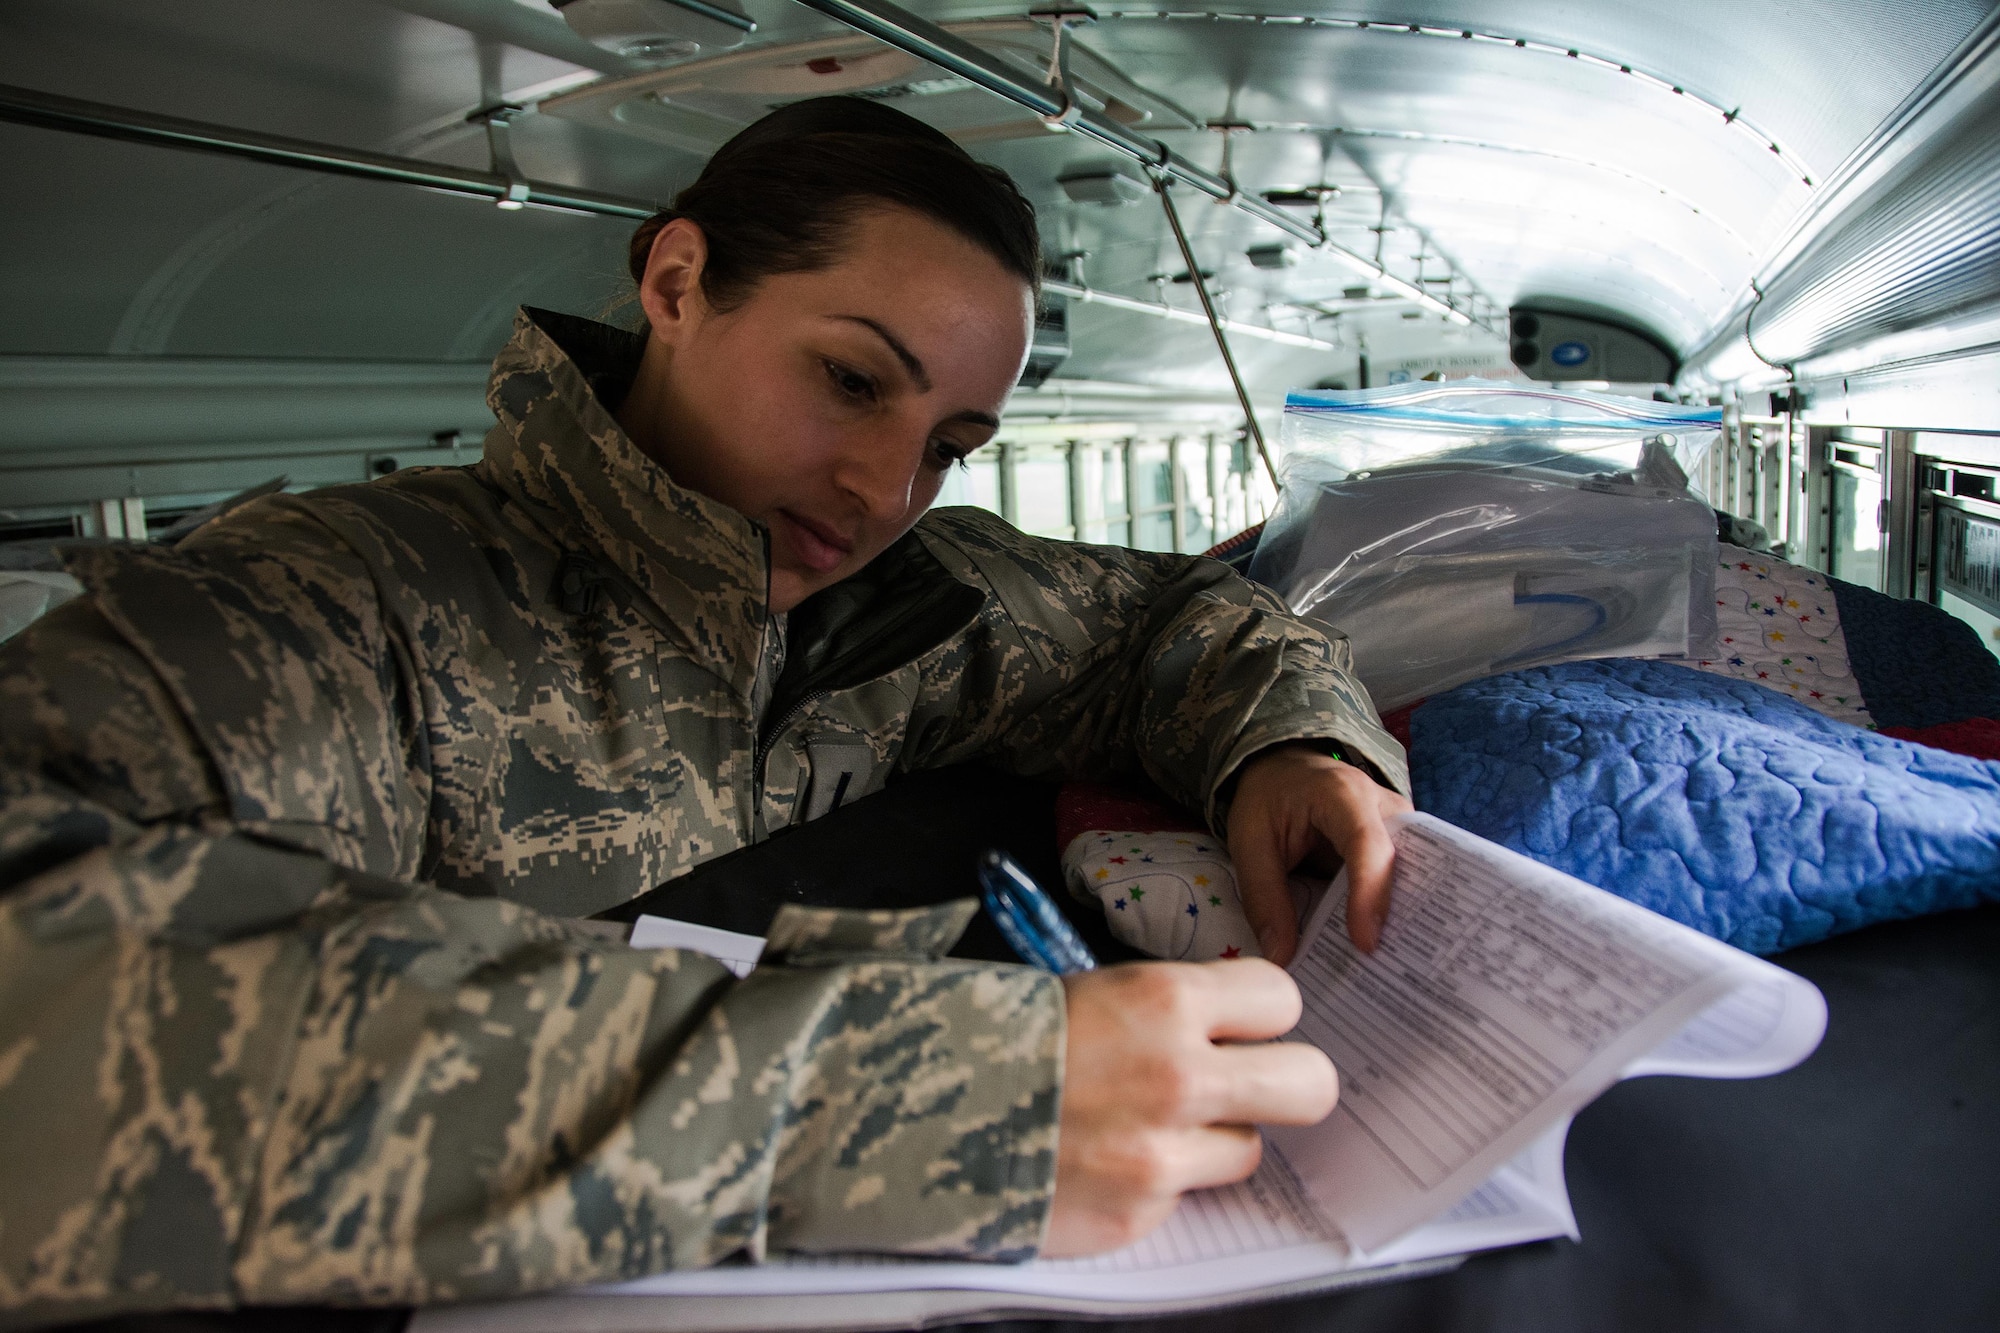 1st Lt. Christine Aye, 60th Inpatient Squadron nurse, goes over a “patient’s” paper work during Patriot Delta at Travis Air Force Base, Calif. on March 24, 2017. Members of the 60th IPTS participated in the Air Force Reserve exercise Patriot Delta, providing enroute patient care and staging the medical manikins. (U.S. Air Force photo by Staff Sgt. Daniel Phelps)